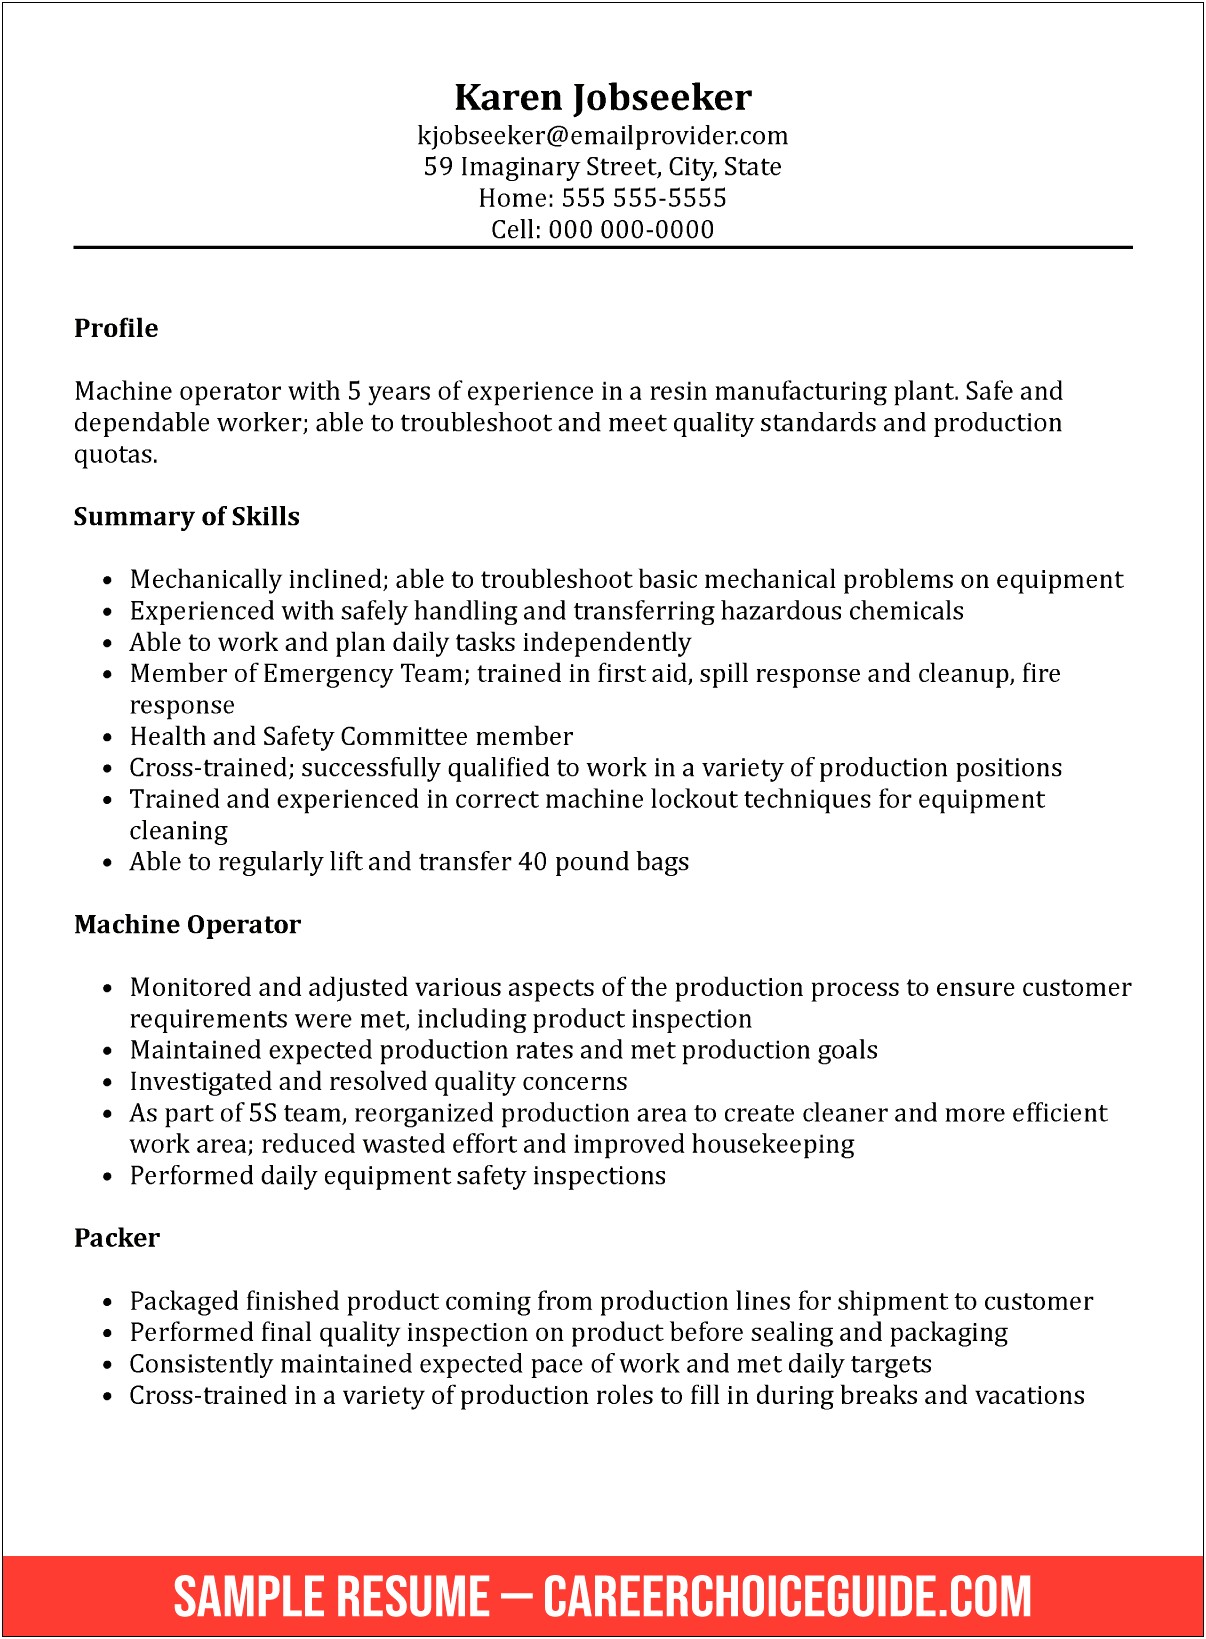 Resume Sample Highlights Of Qualifications